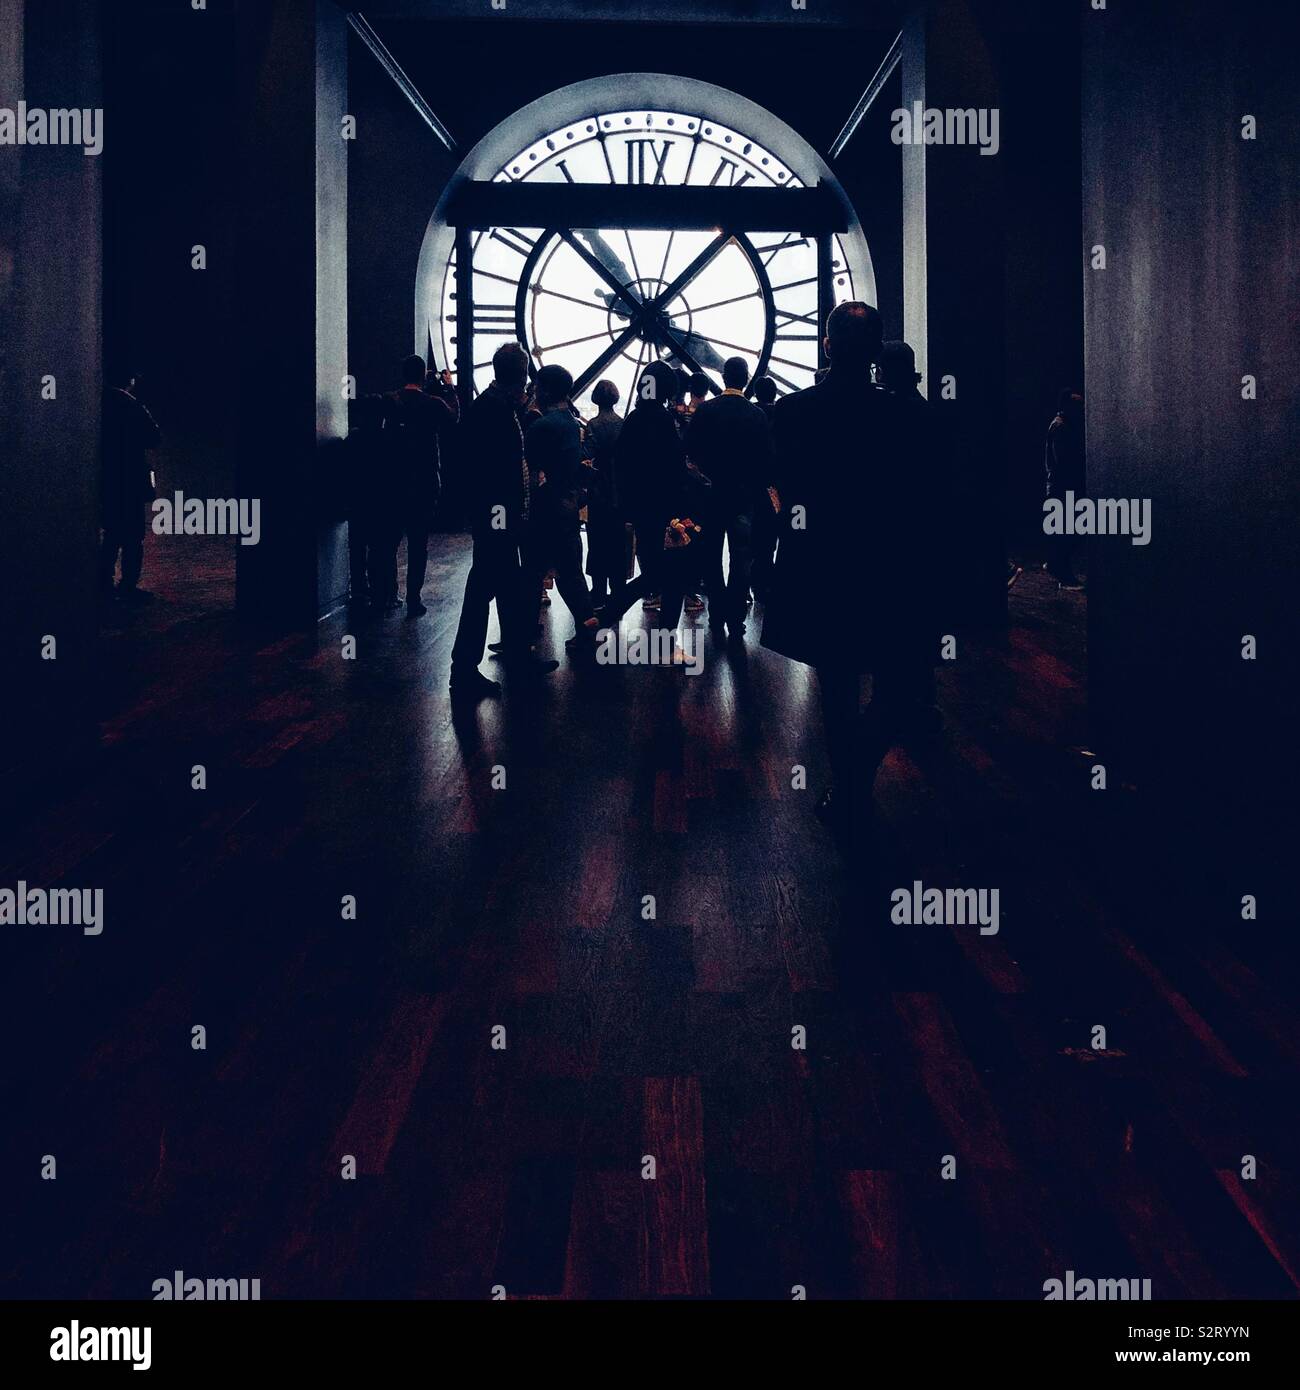 Crowds of people in front of famous clock at Musée d' Orsay  in Paris Stock Photo